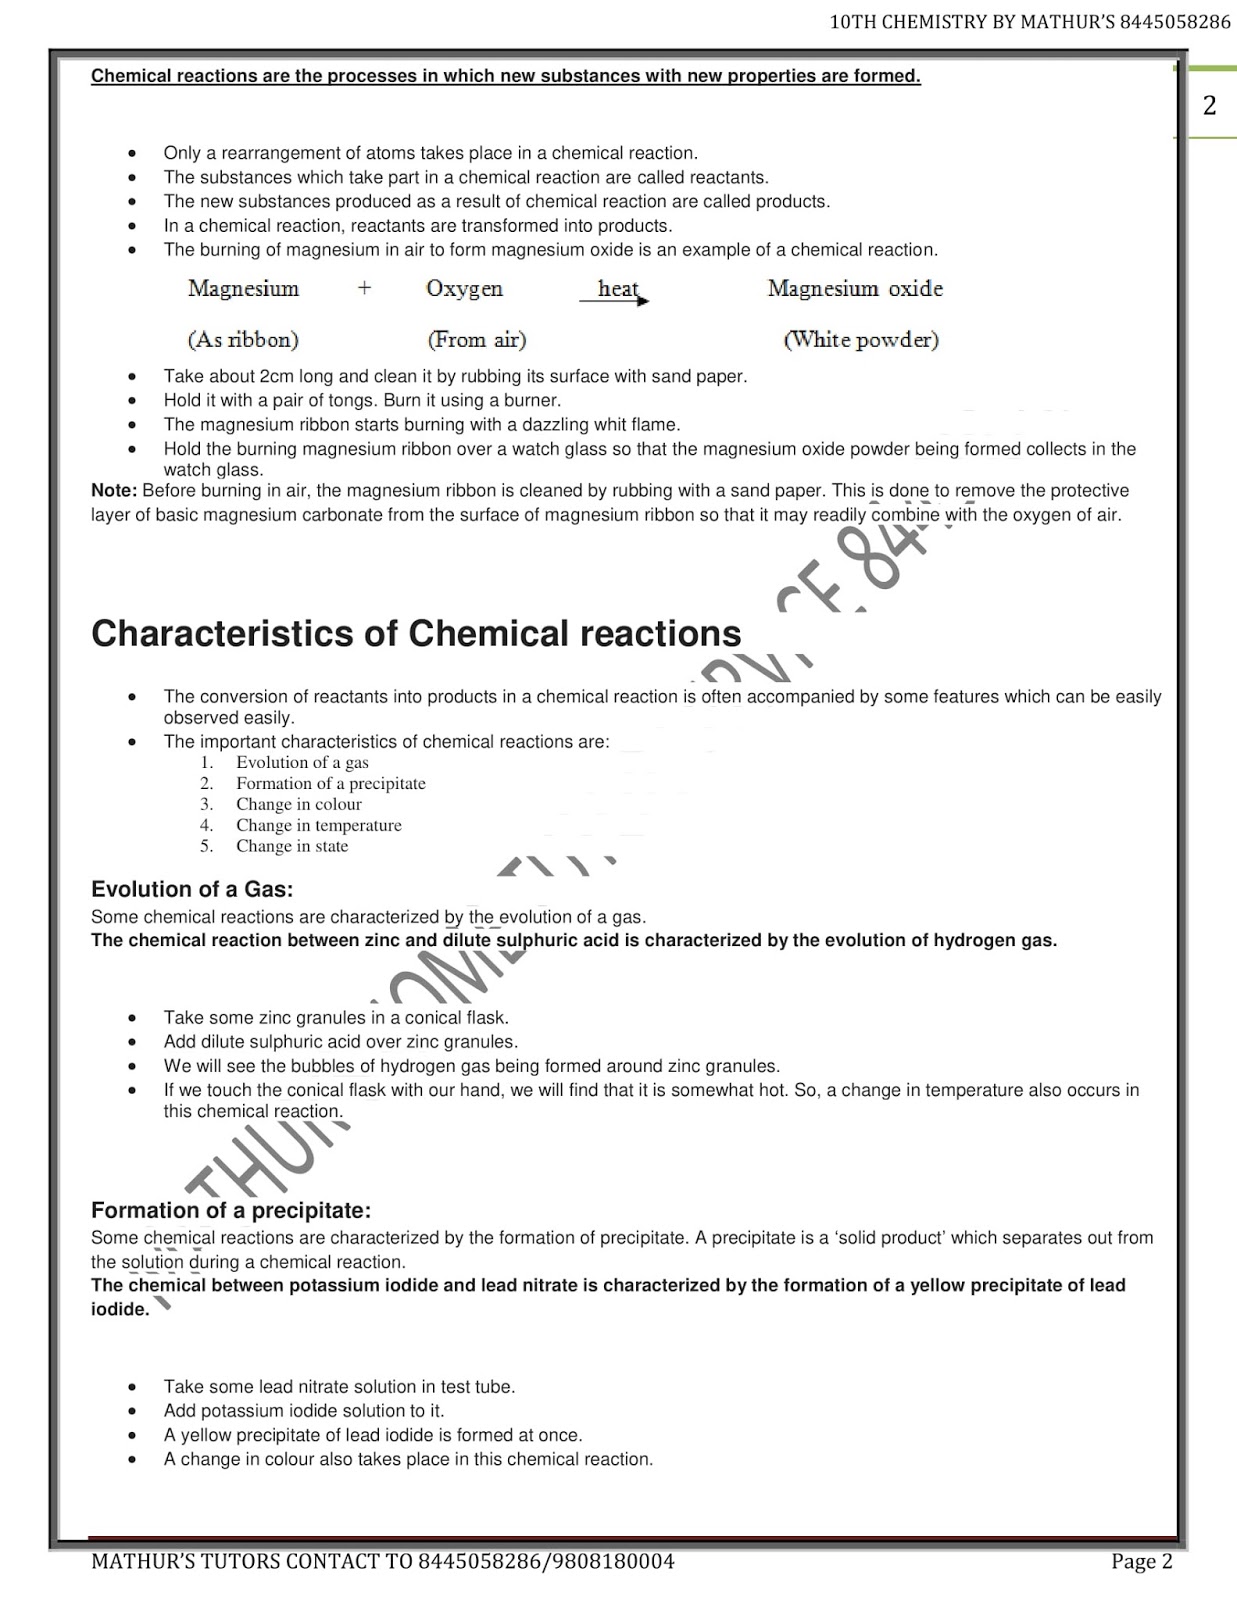 chemical reactions and equations class 10 assignment